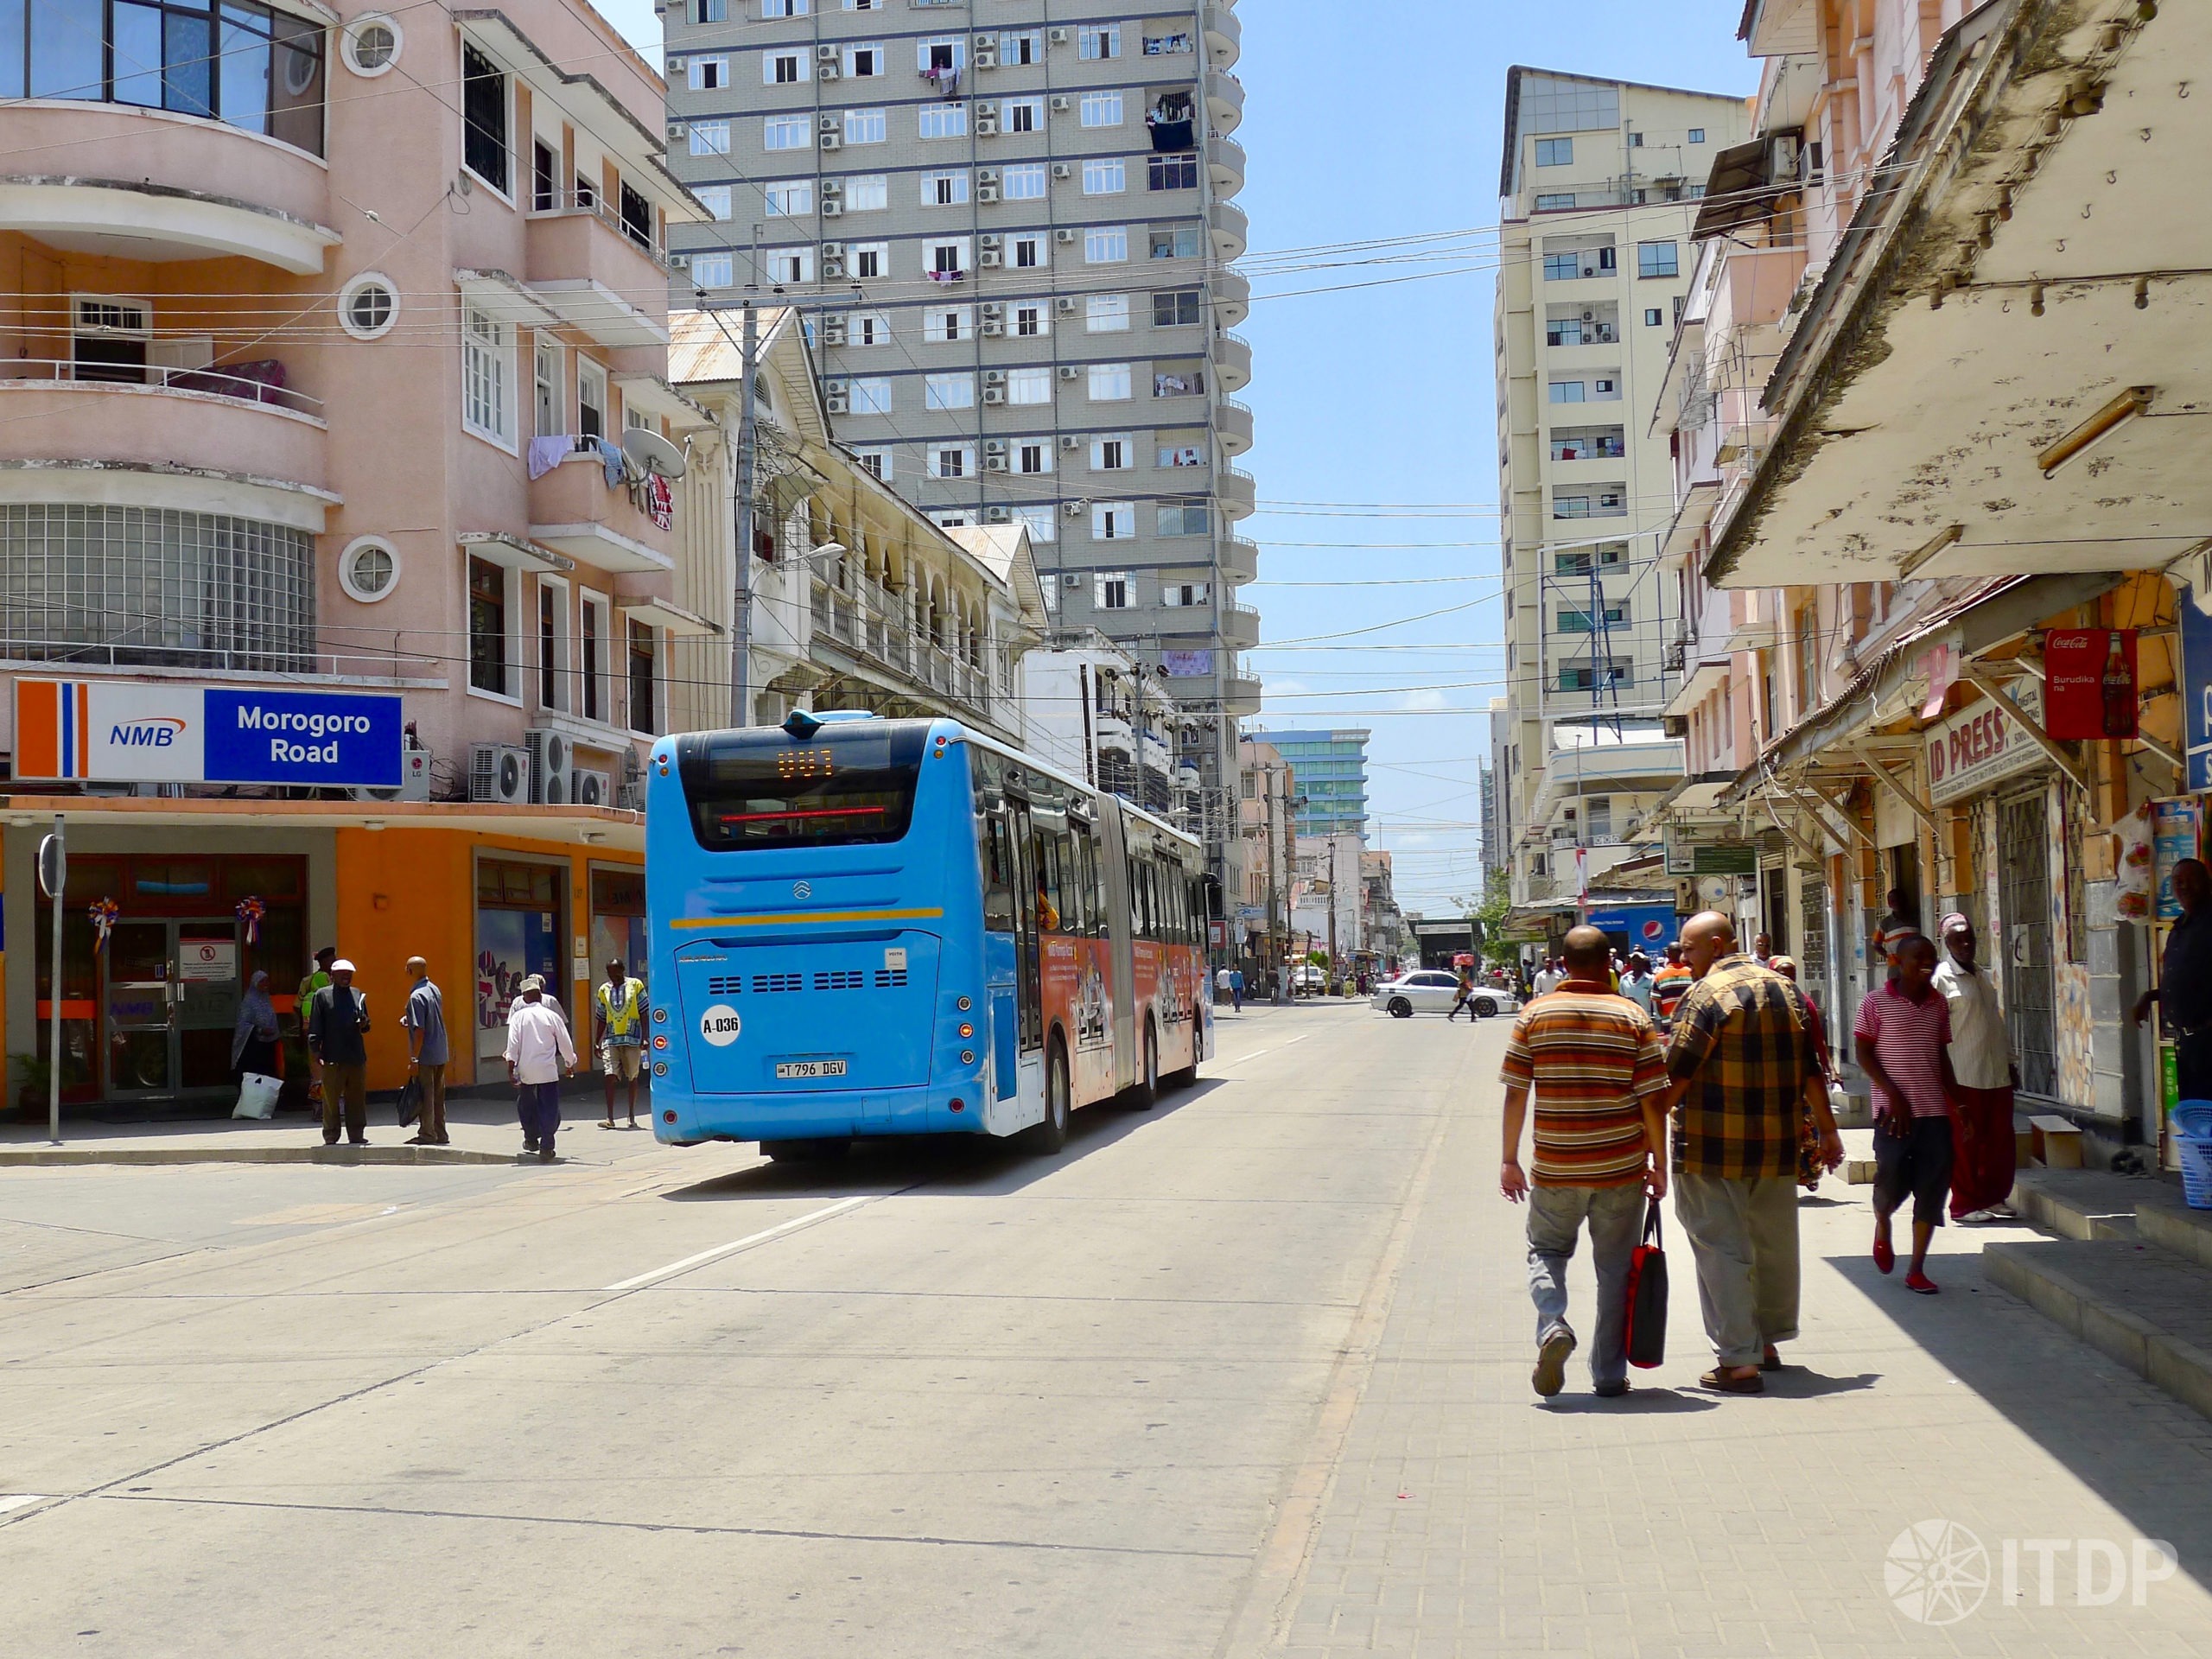 Transit-Oriented Development as an Anchor to Compact, Equitable, and Accessible African Cities